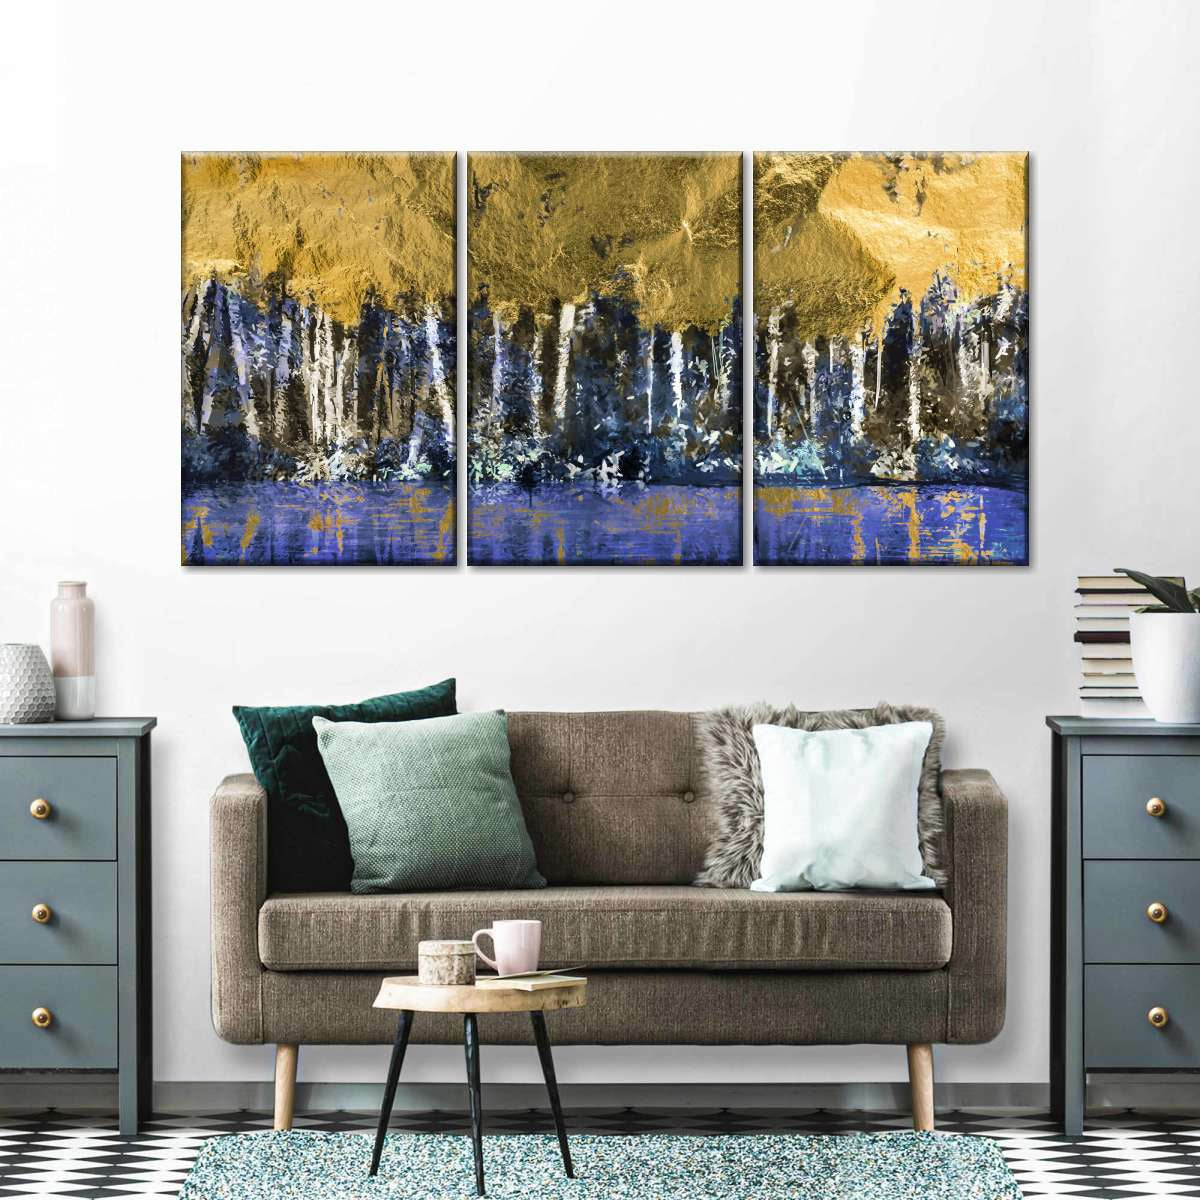 7 Ways to Use Gold Leaf Art in Your Home Décor